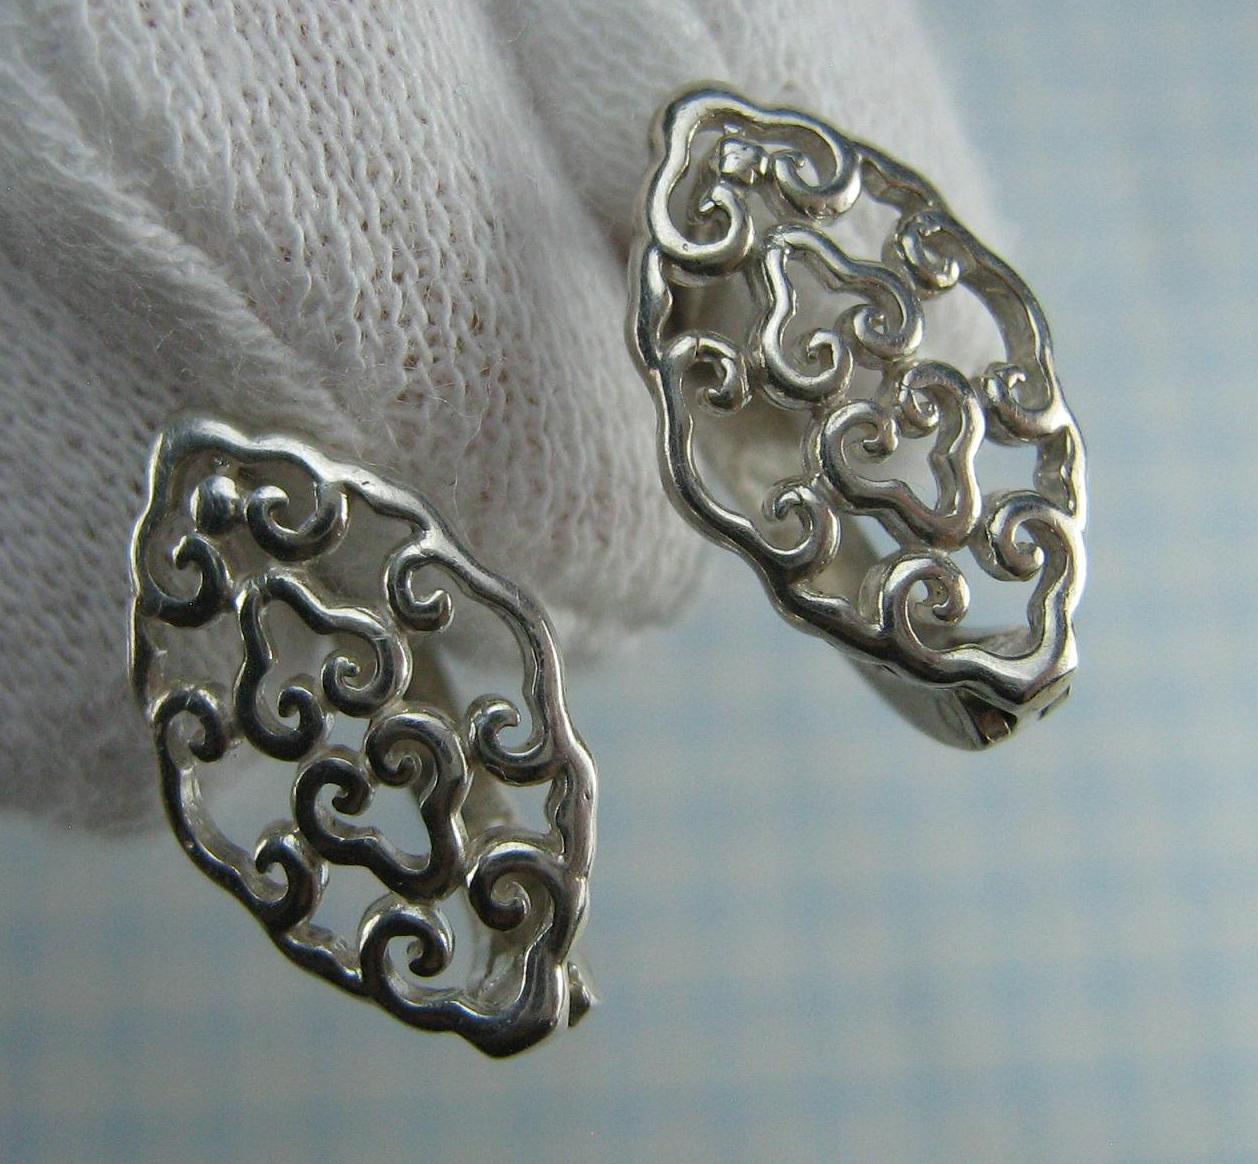 Pre-owned and estate 925 solid Sterling Silver light and marquise shaped earrings with latch back snap closure decorated with openwork filigree pattern, suitable for everyday and casual wearing